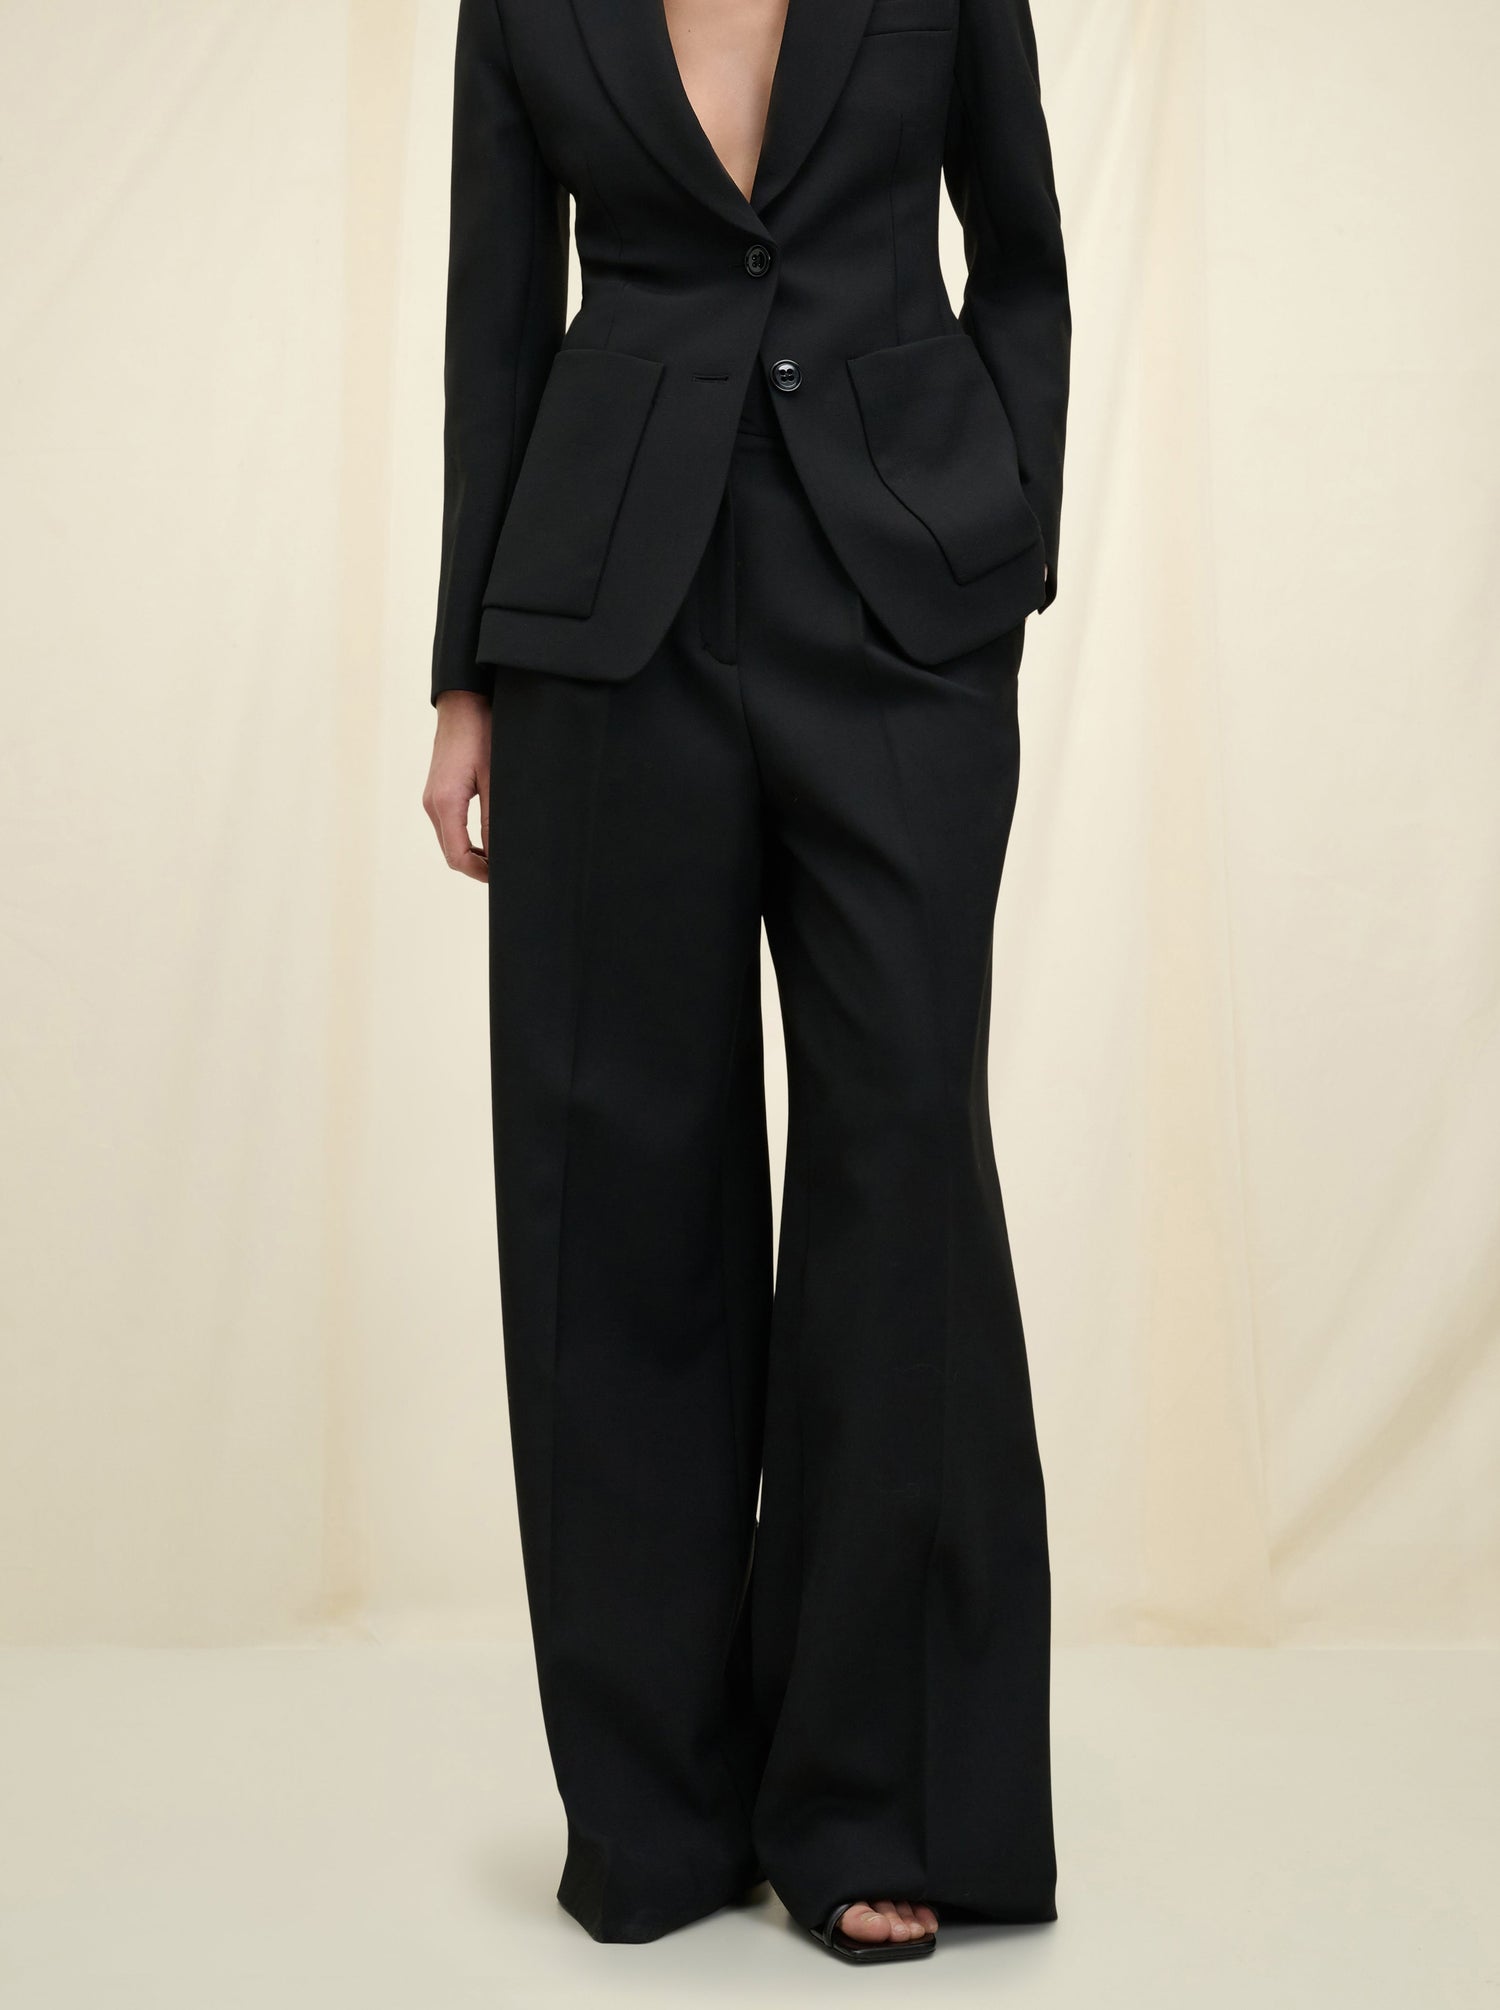 REFRESHING AMBITION high-waisted pants, pure black